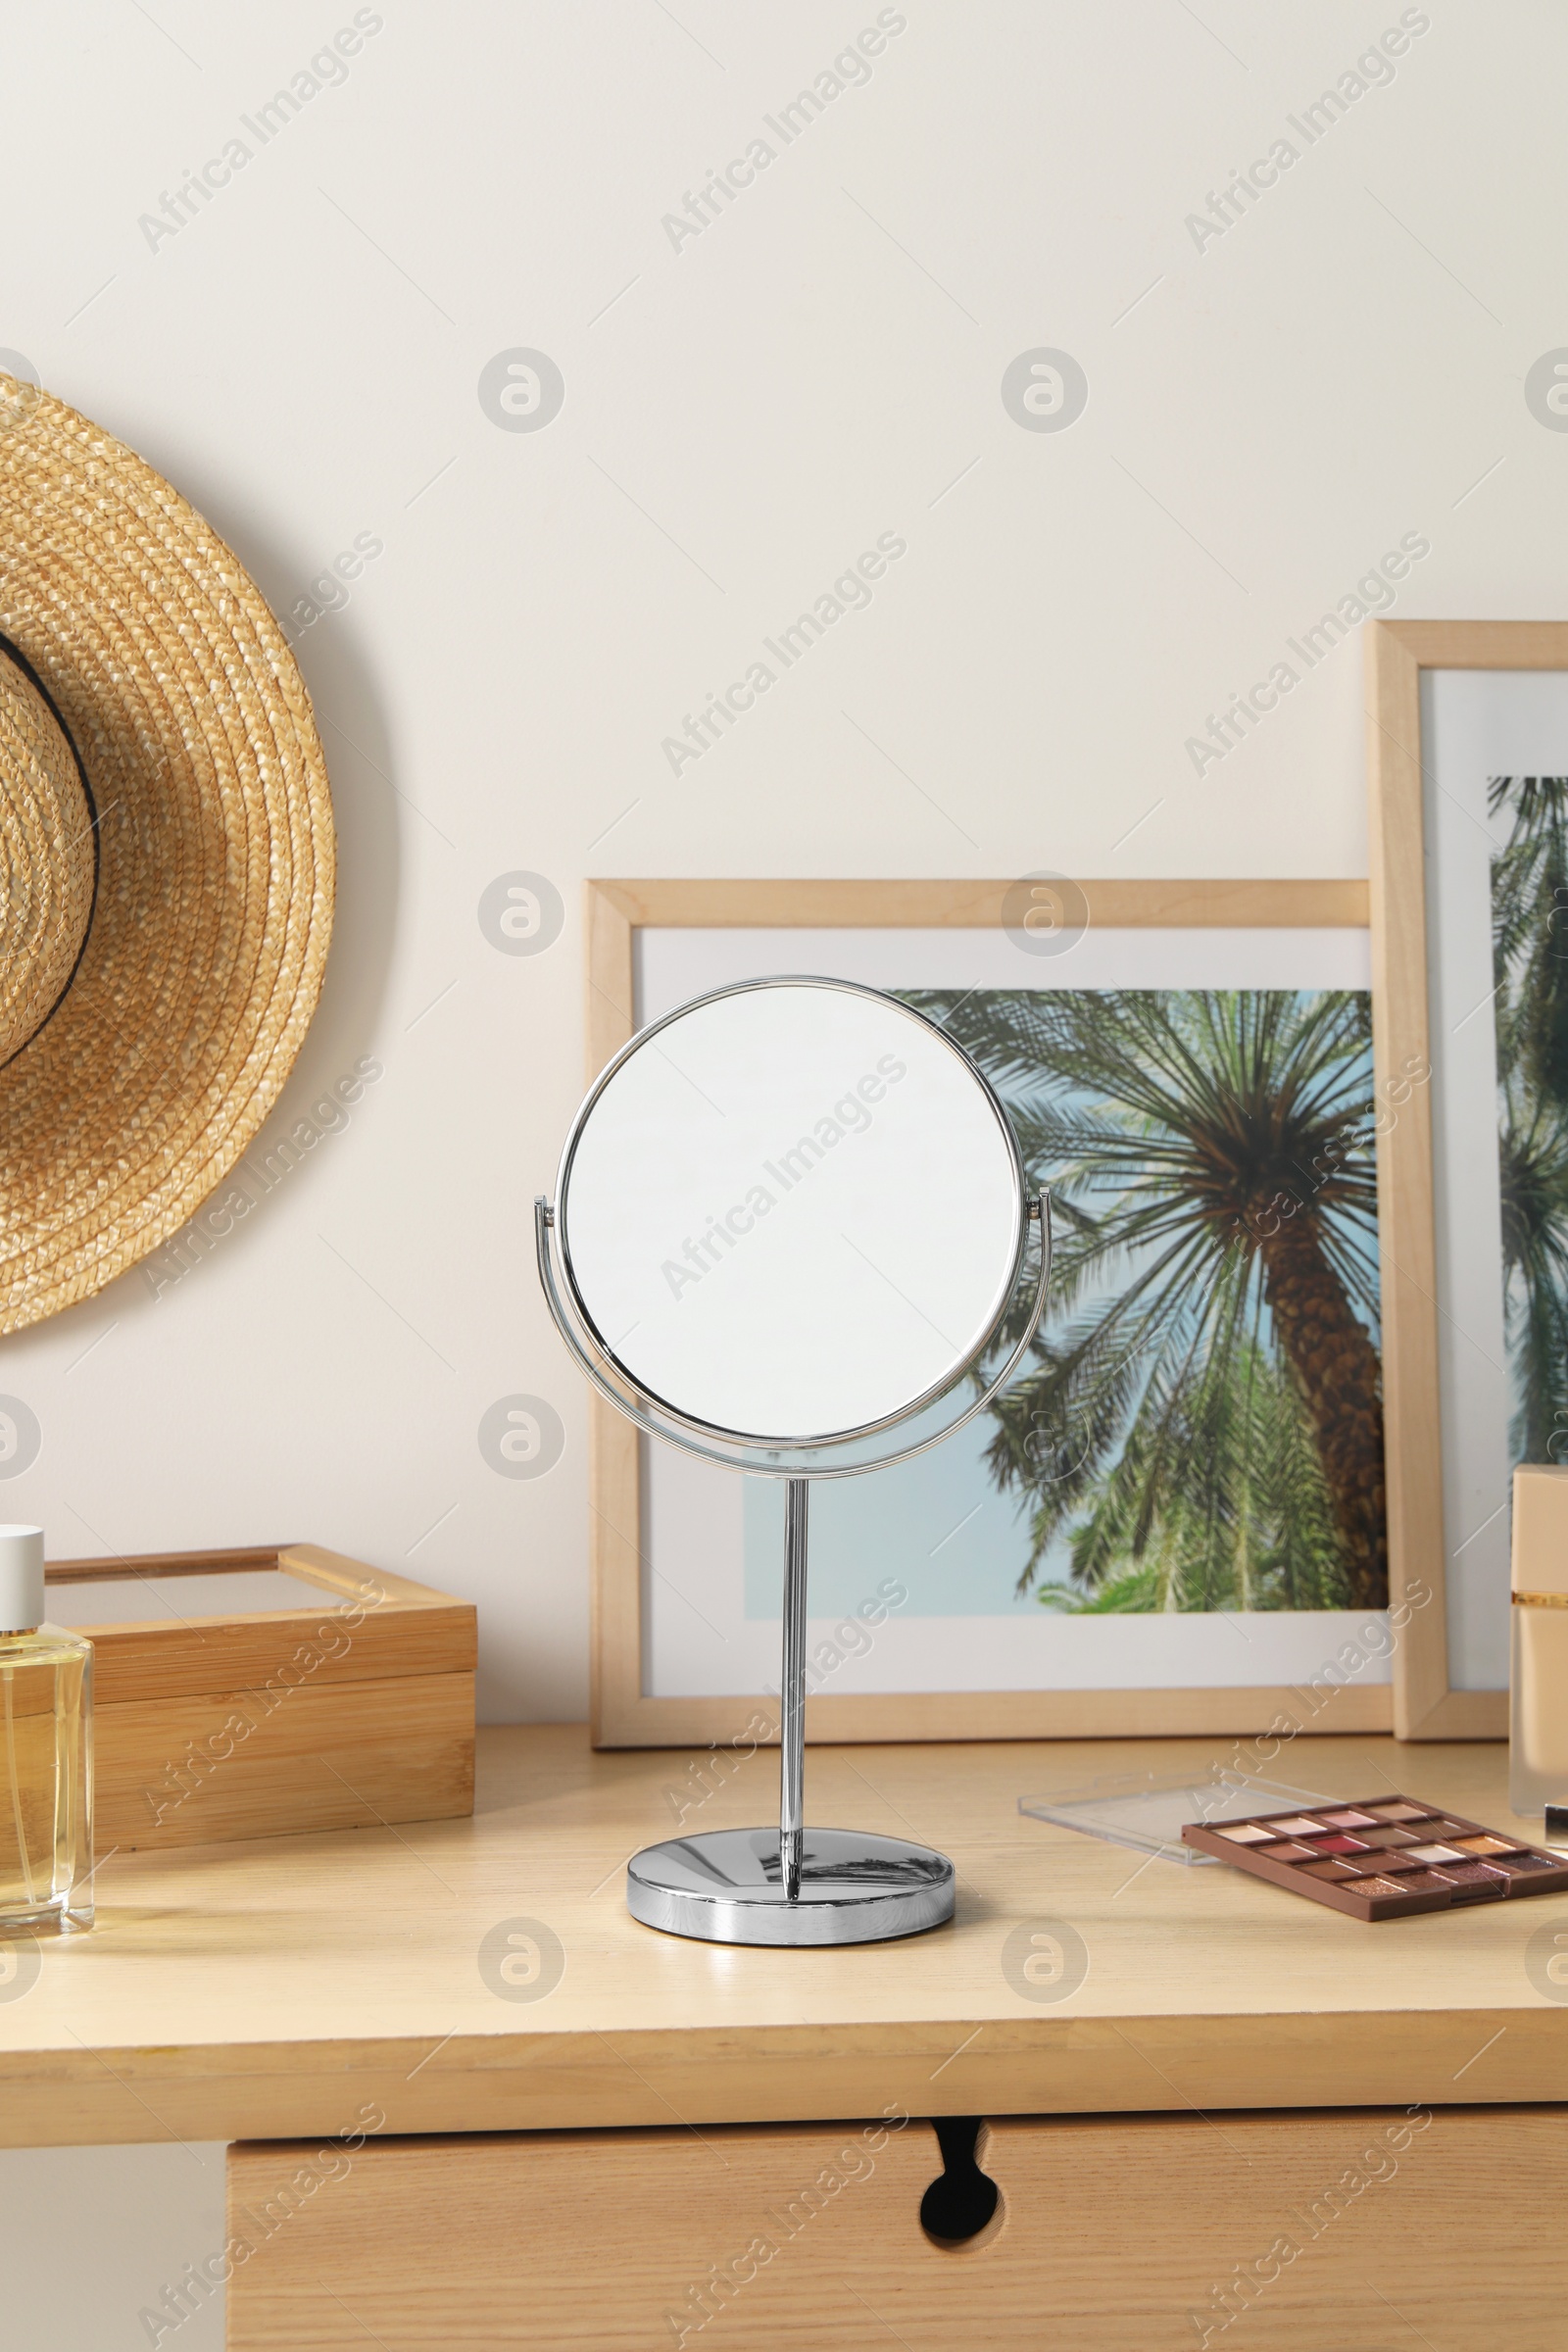 Photo of Mirror, perfume and accessories on wooden makeup table